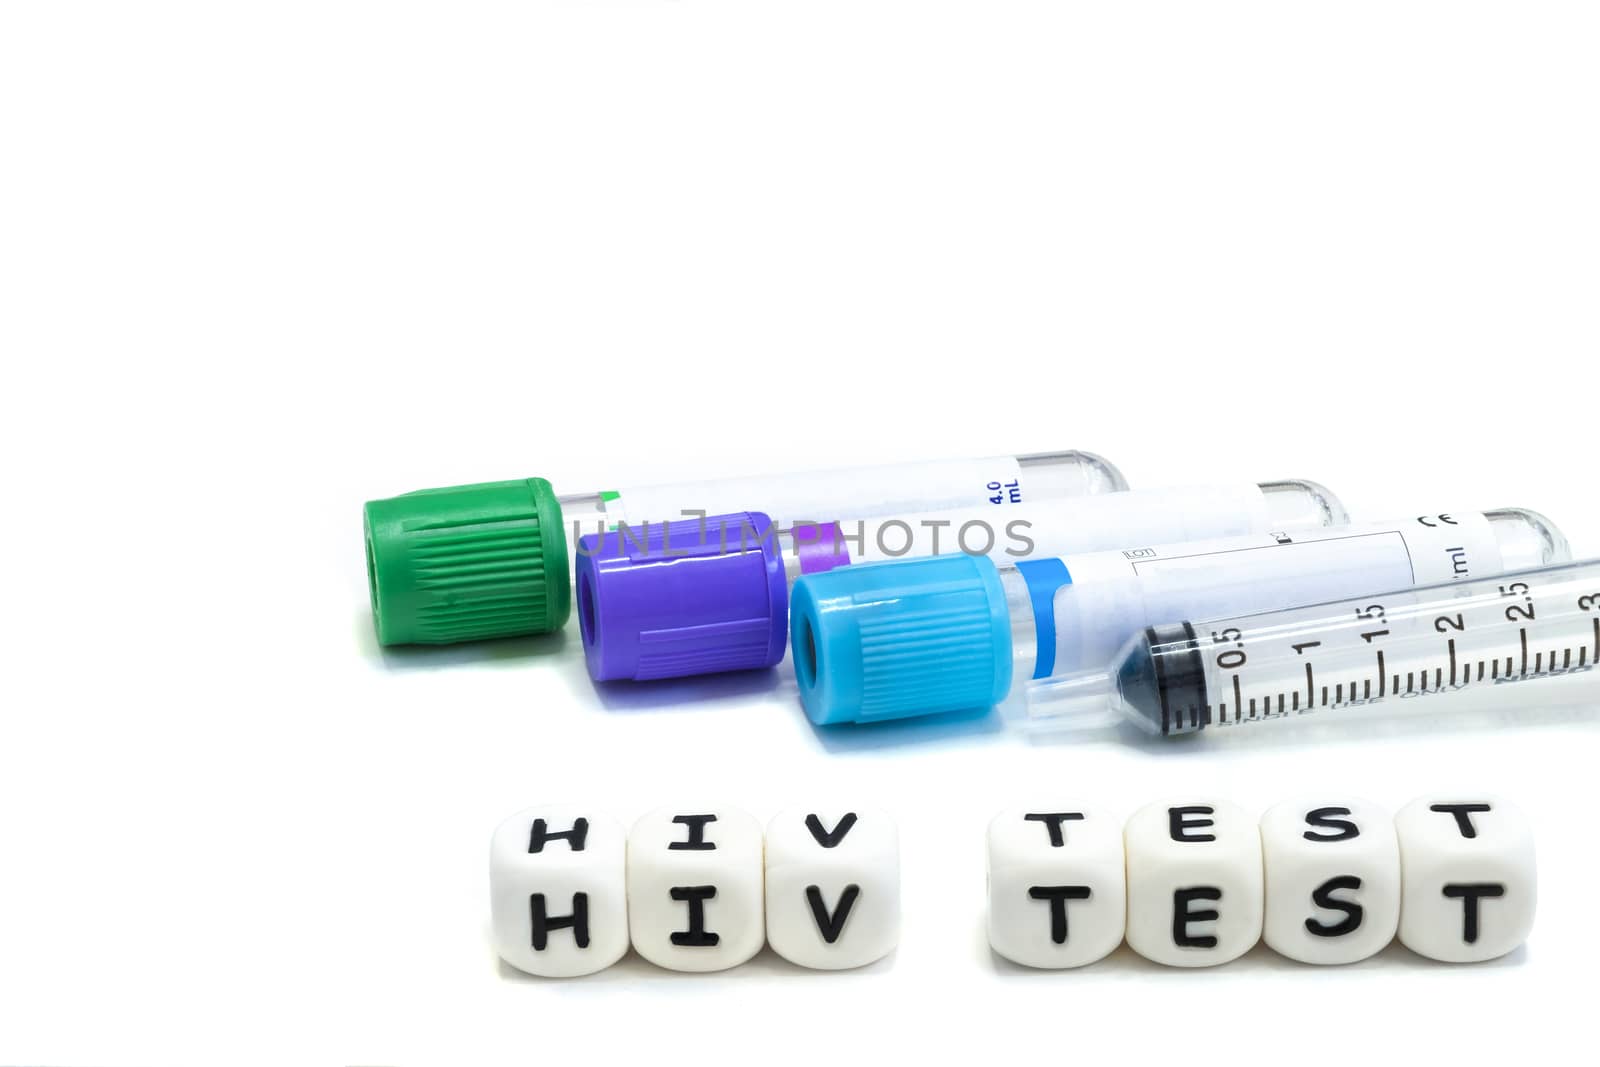 Laboratory test tubes for blood sampling in the patient with HIV infection. Macro image on white background.